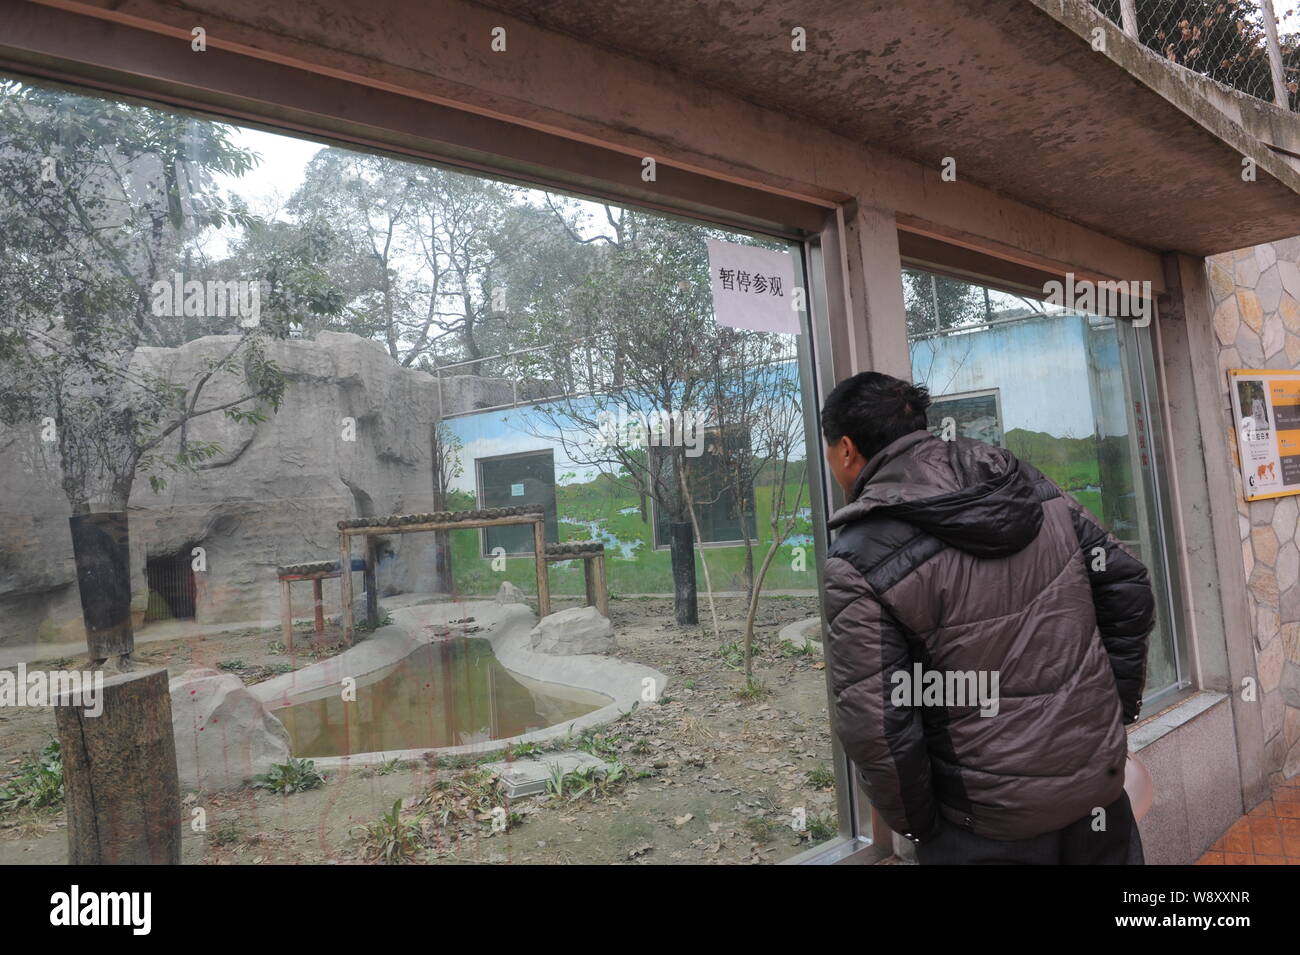 A visitor looks into the tiger enclosure into which Chinese man Yang Jinhai jumped to feed tigers at the Chengdu Zoo in Chengdu city, southwest Chinas Stock Photo